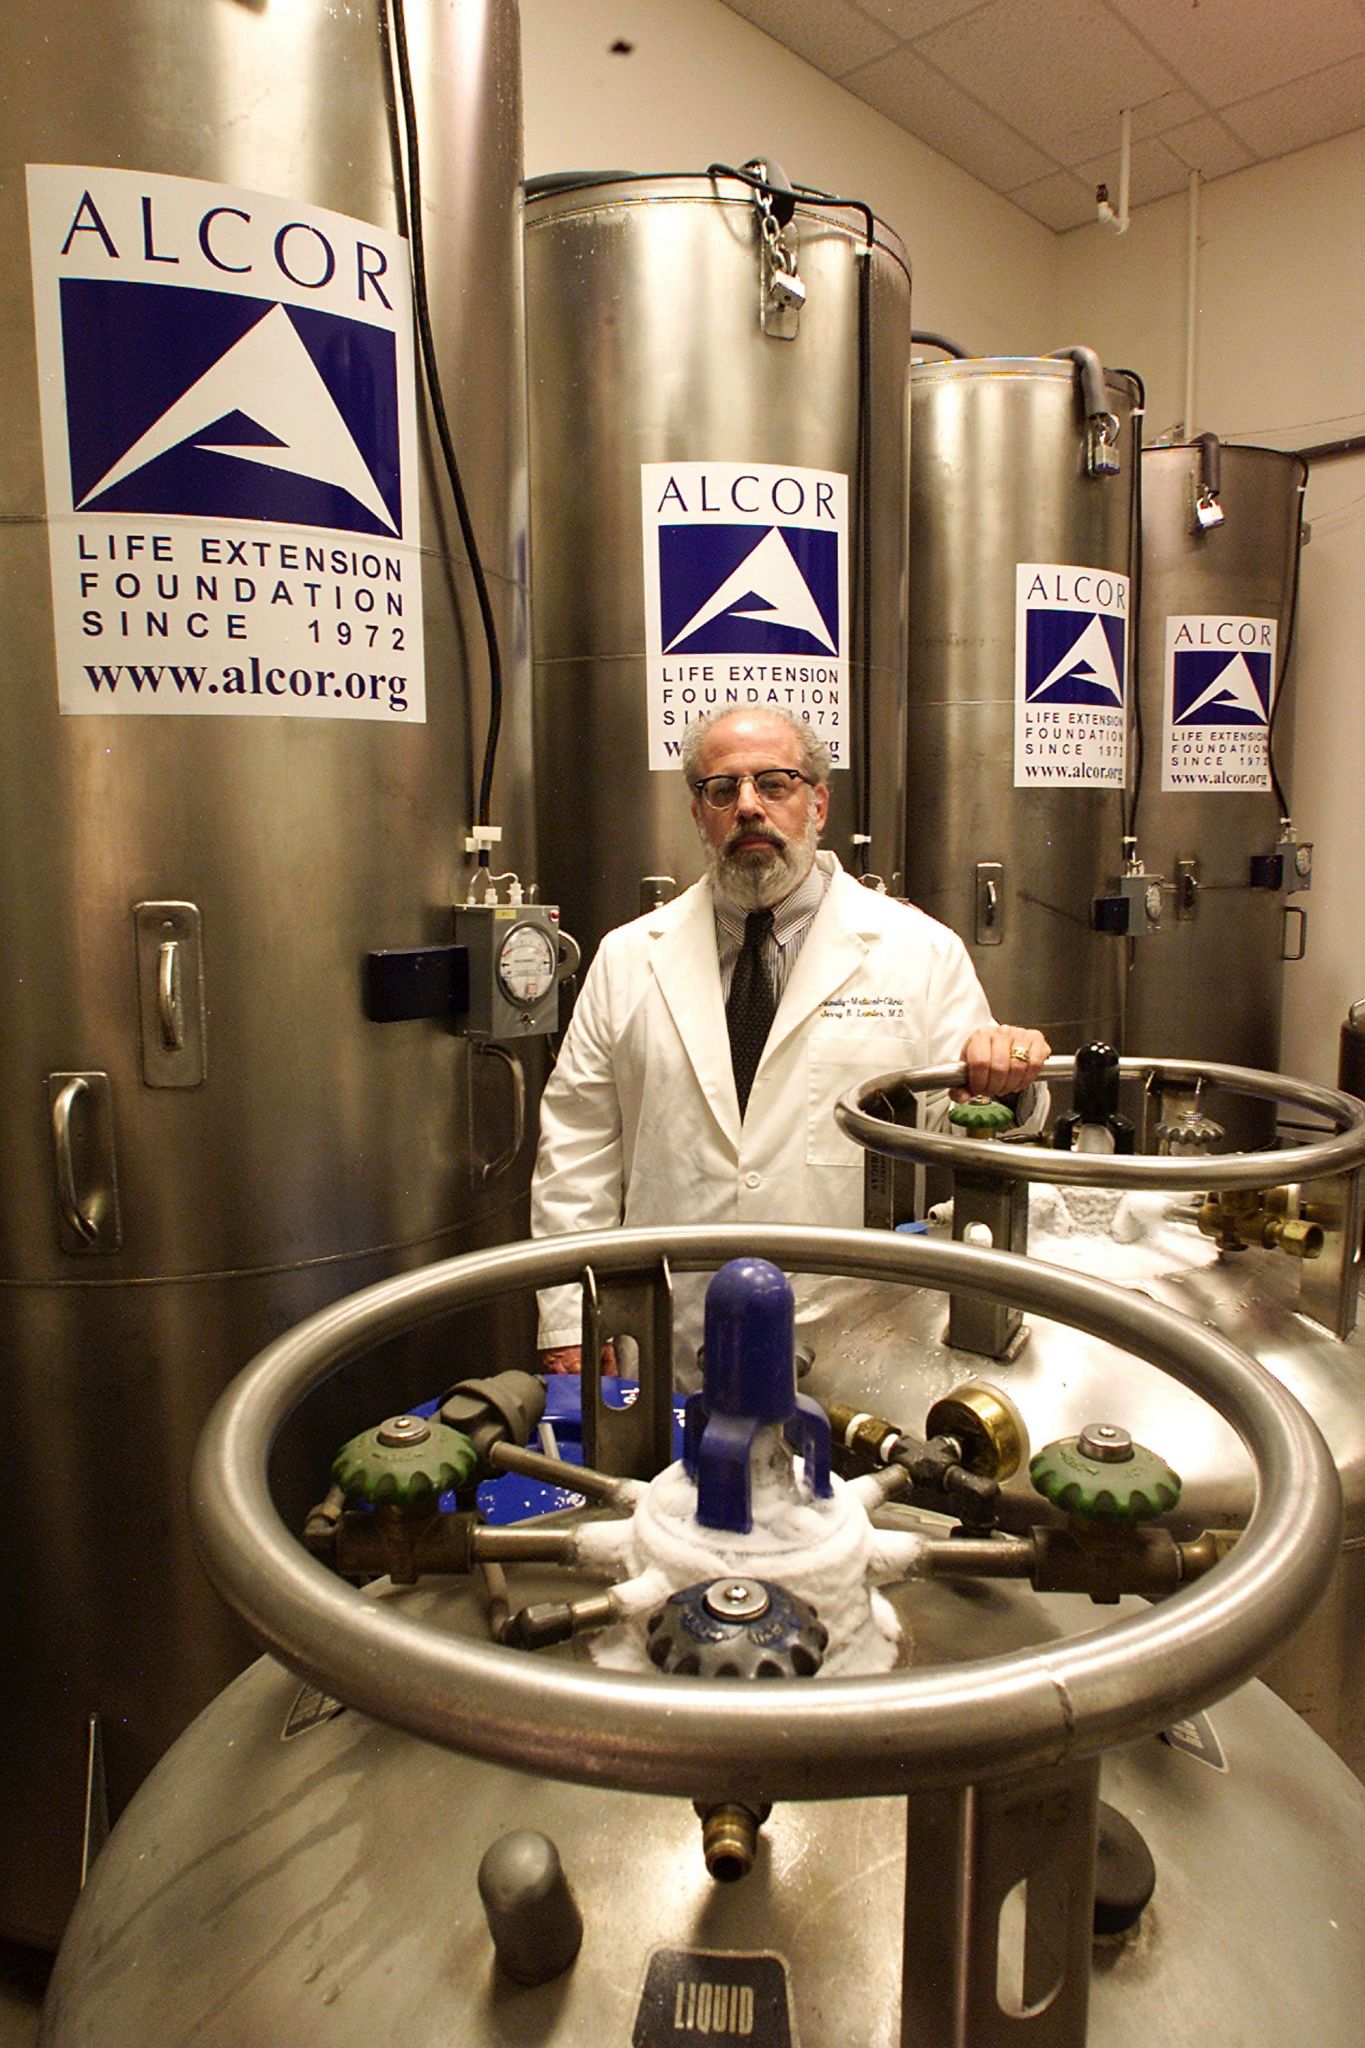 Calif. scientist's son suing cryonics nonprofit for incorrectly